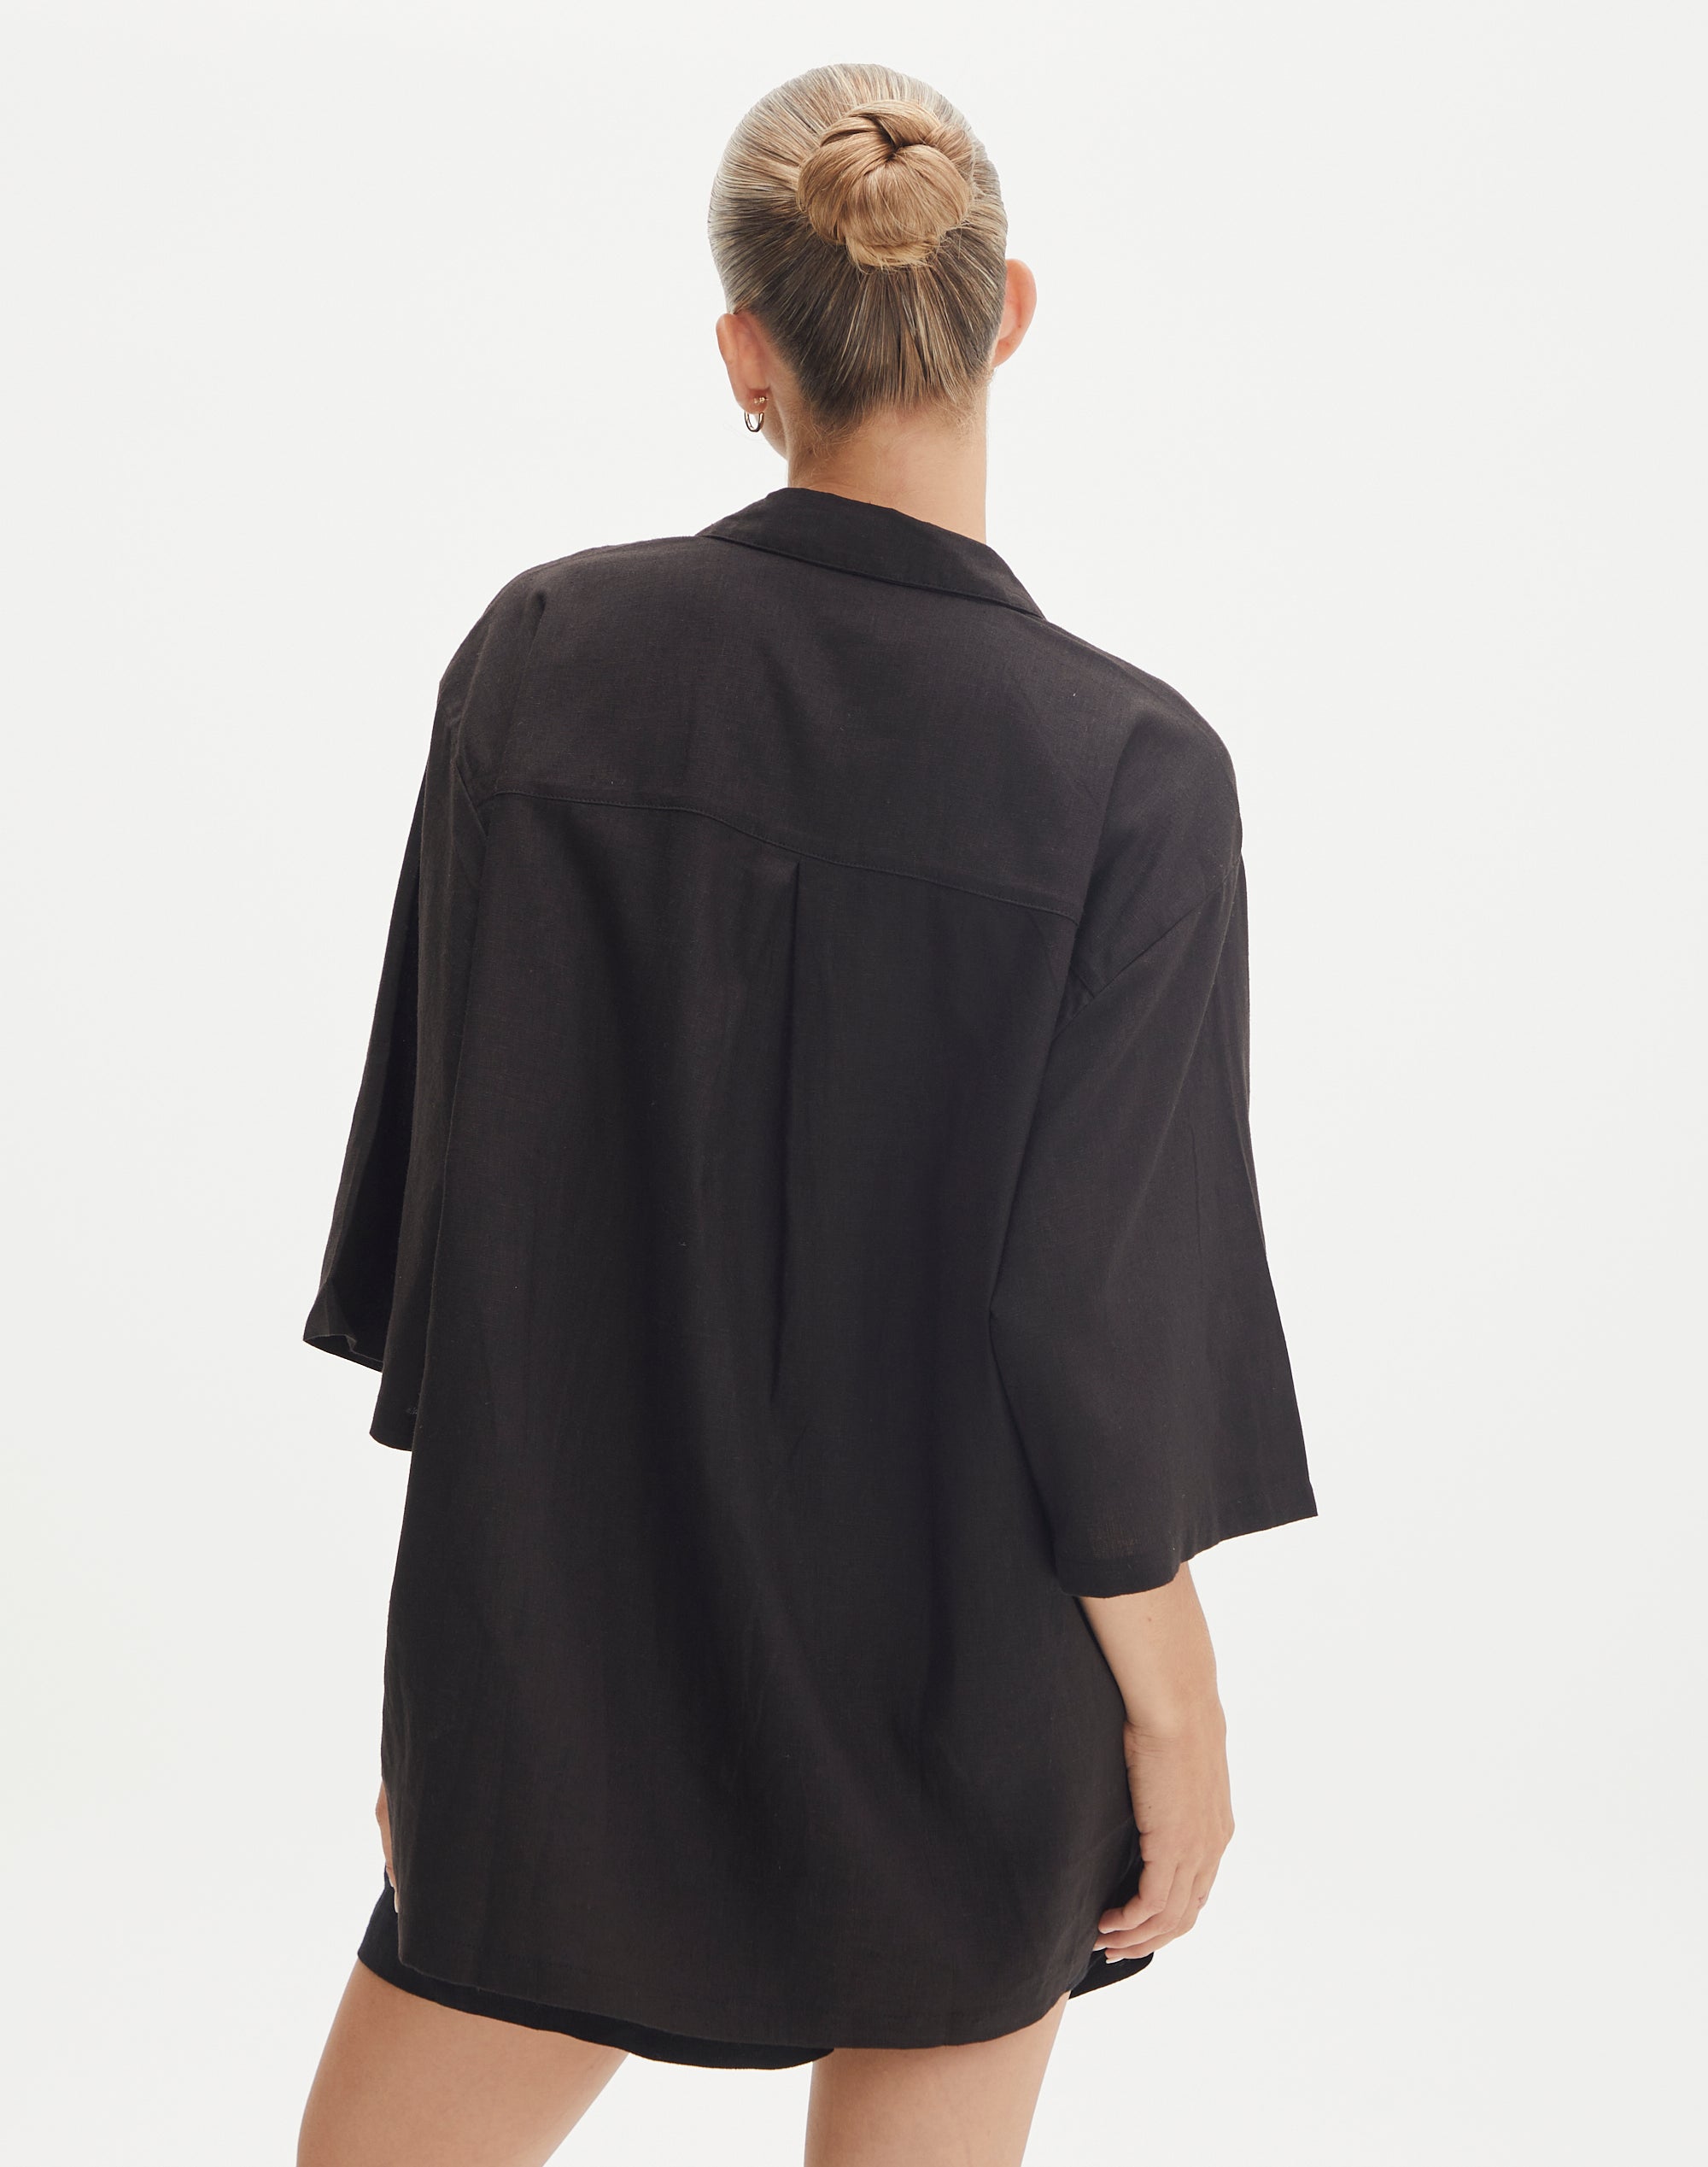 Supersoft Backless Short Sleeve Top in Make It Rain